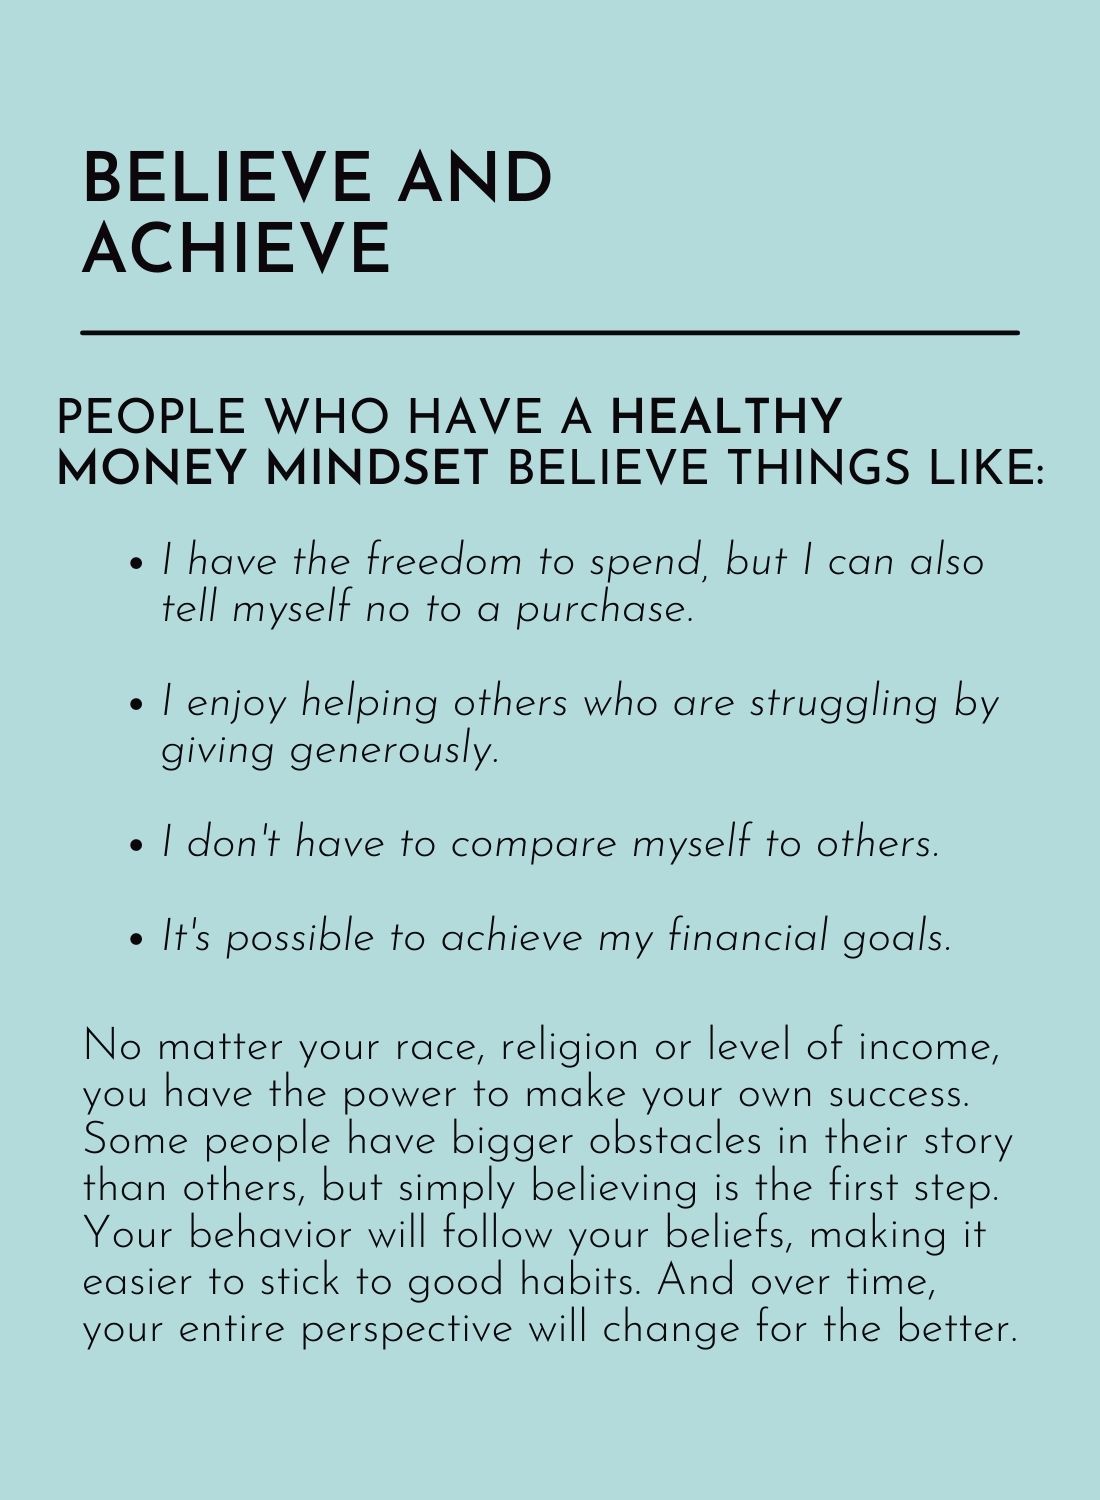 Believe and Achieve:

People who have a healthy money mindset believe things like:

• I have the freedom to spend, but I can also tell myself no to a purchase.
• I enjoy helping others who are struggling by giving generously.
• I don’t have to compare myself to others.
• It’s possible to achieve my financial goals.

No matter your race, religion or level of income, you have the power to make your own success. Some people have bigger obstacles in their story than others, but simply believing is the first step. Your behavior will follow your beliefs, making it easier to stick to good habits. And over time, your entire perspective will change for the better.
